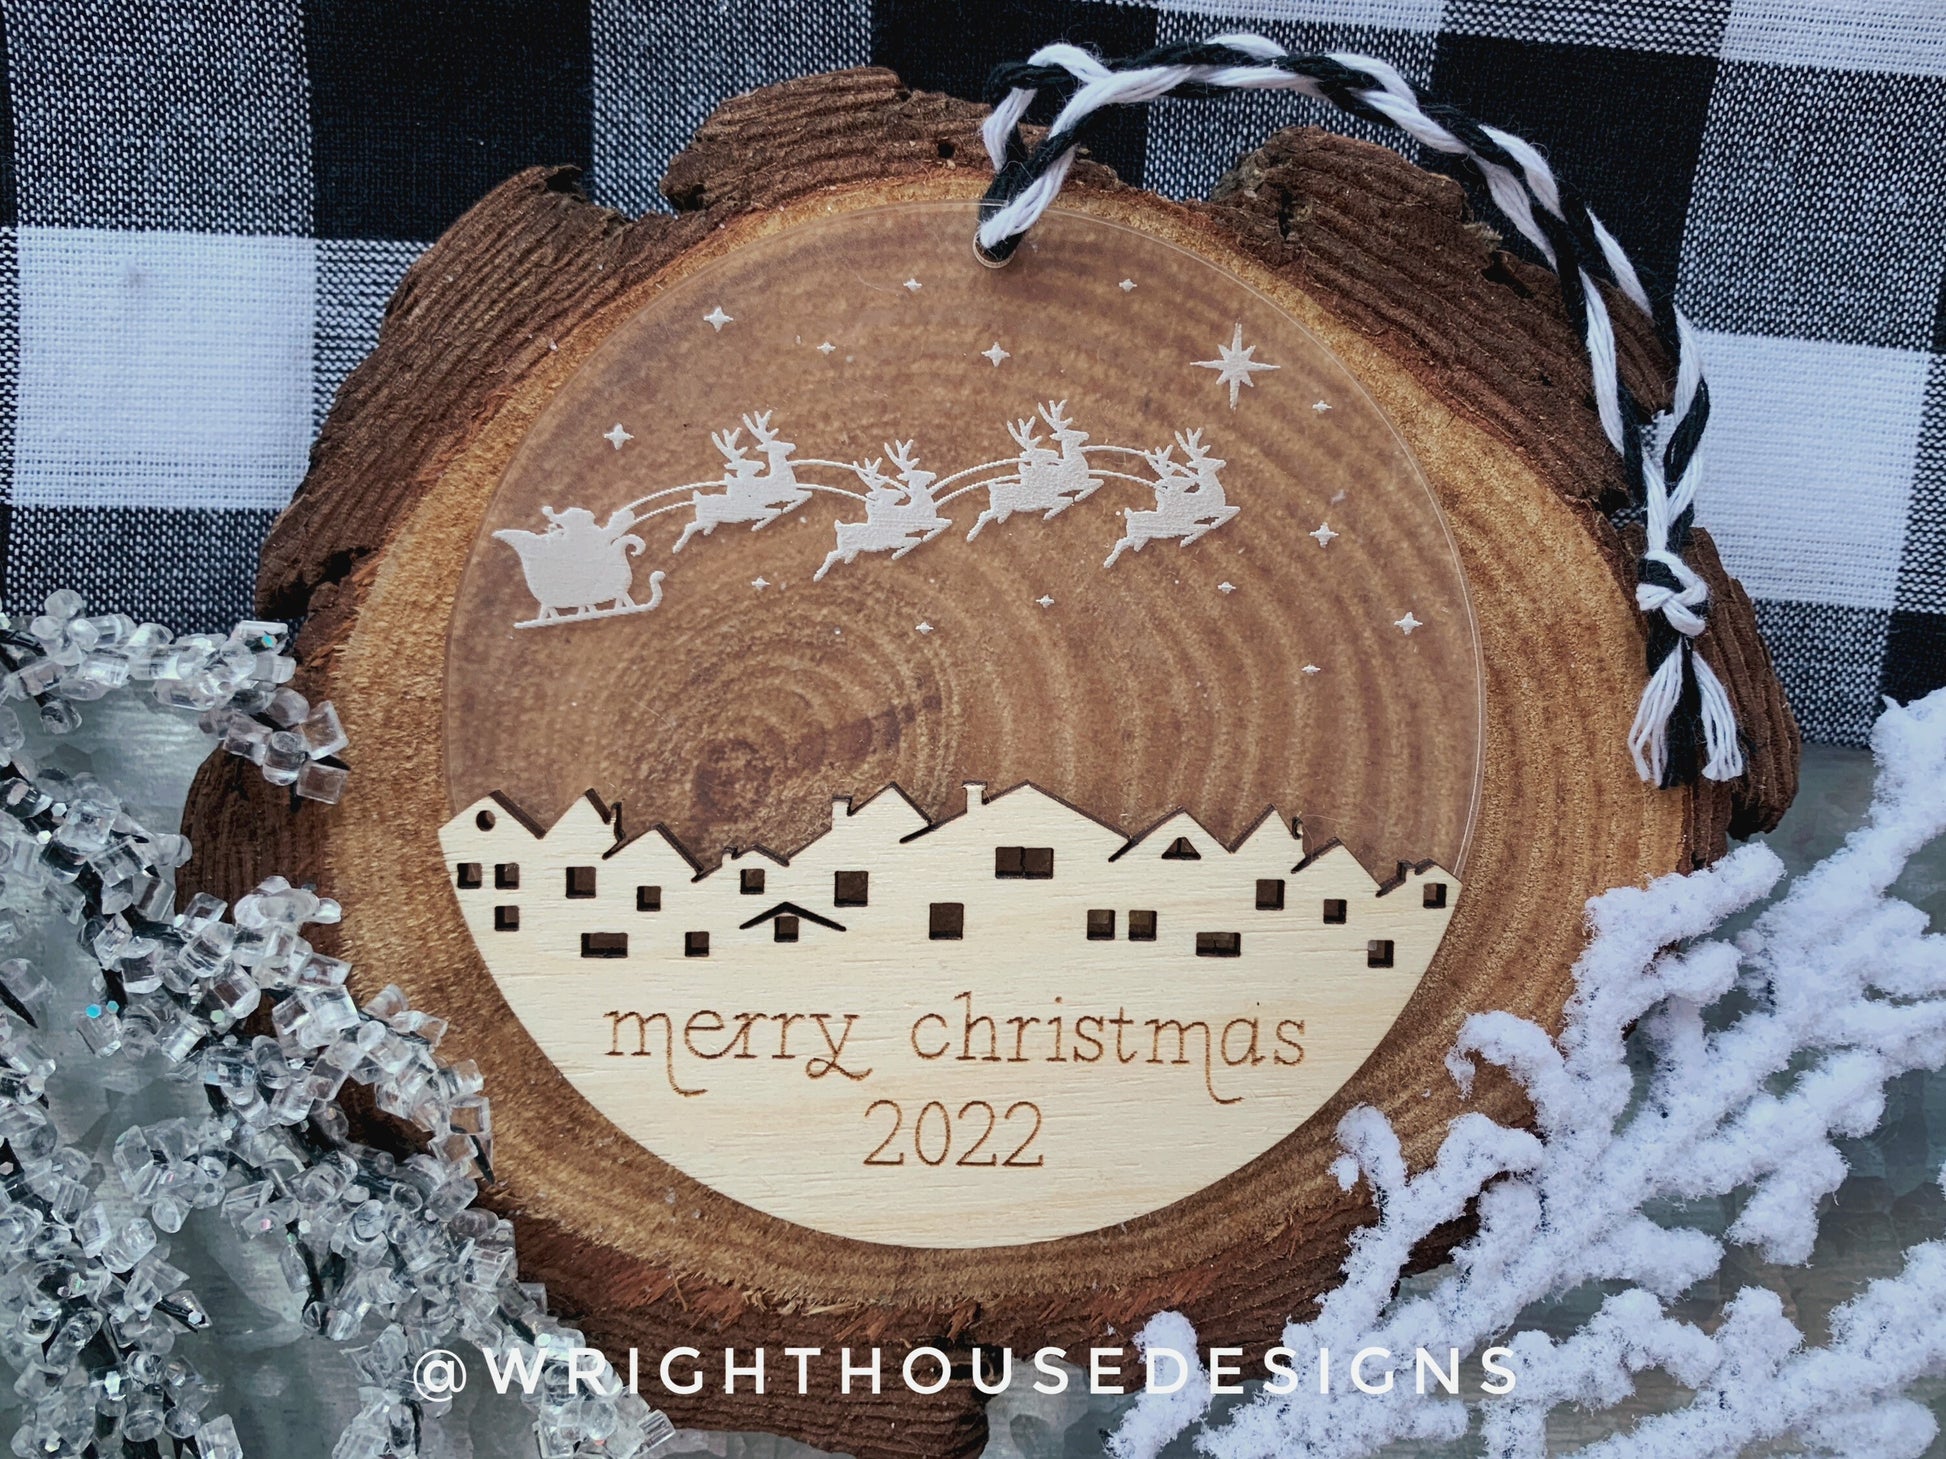 Santa’s Sleigh - Cityscape Winter Sky Scene - Yearly Christmas Eve Tree Ornament - Layered Wood and Acrylic - Stocking Tag - Holiday Decor